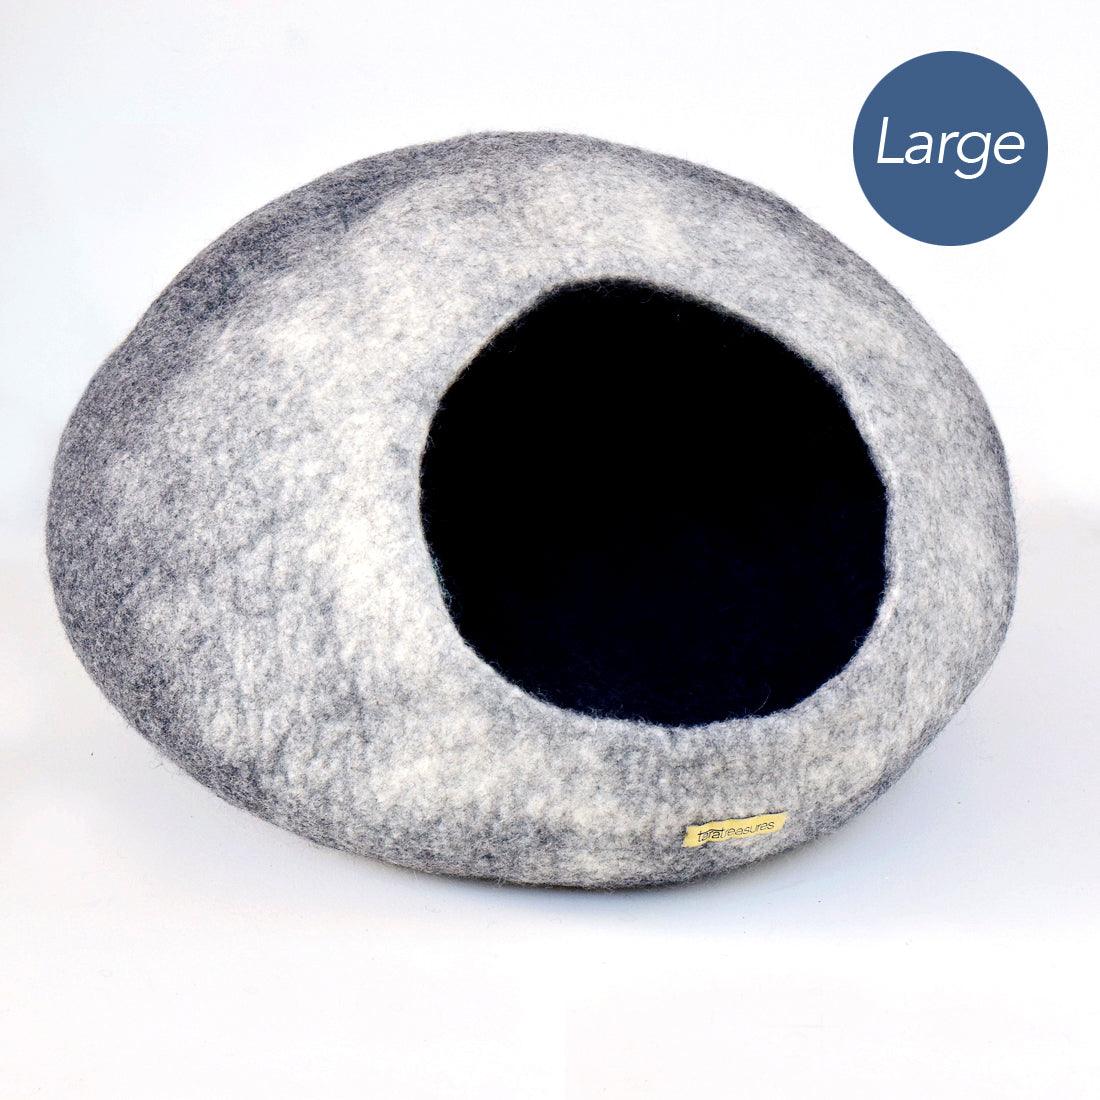 Large Cat Cave - White Grey Ombre Cocoon - Tara Treasures